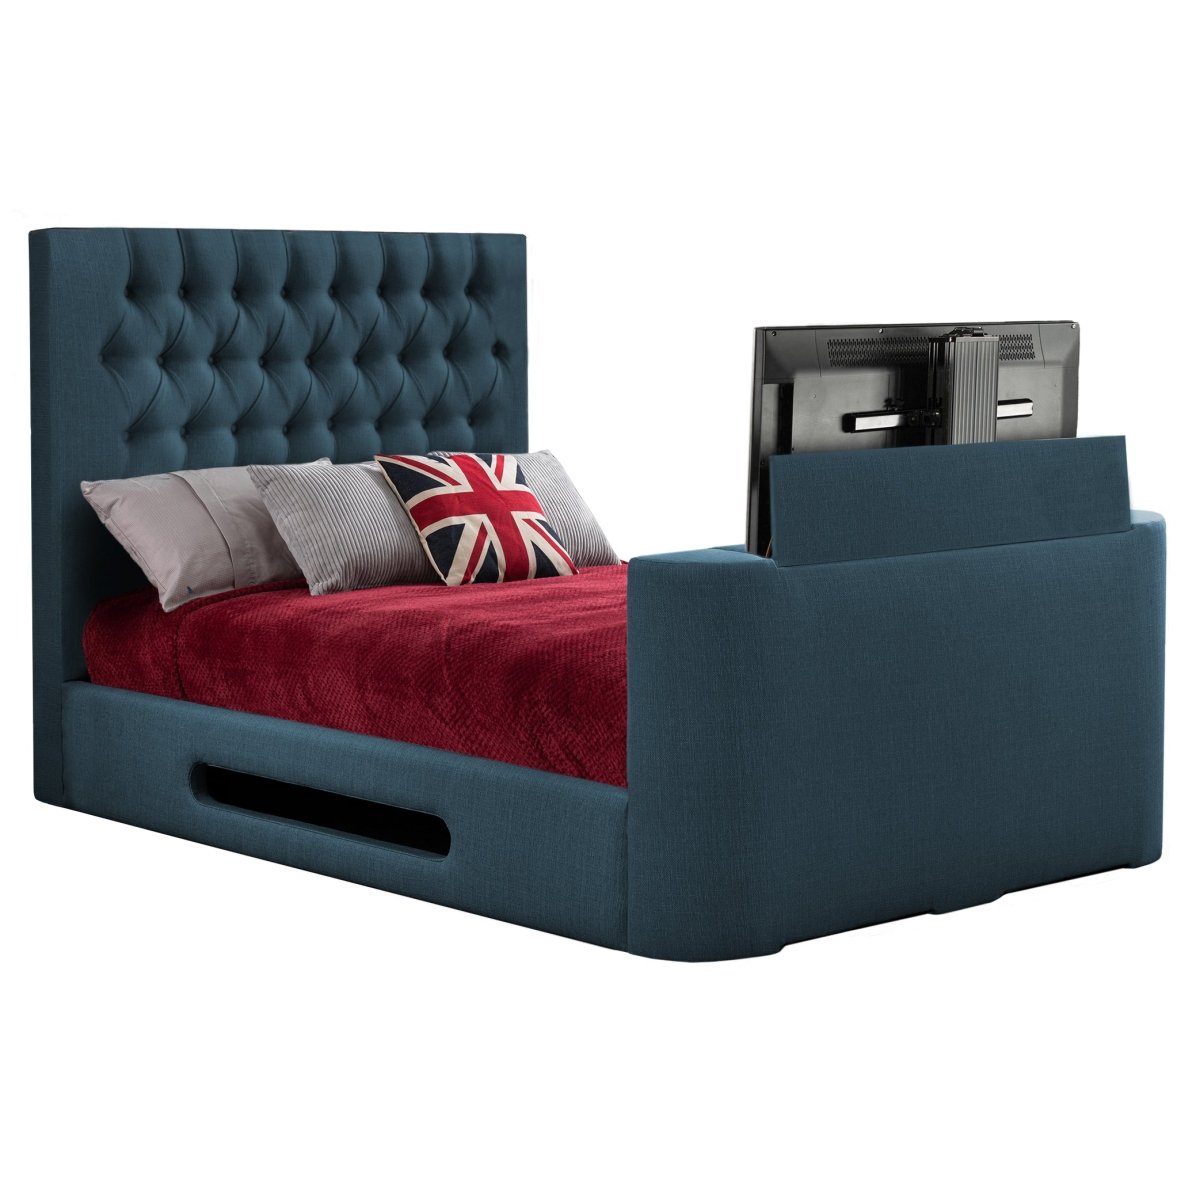 Loren Fabric TV Bed Frame - Sweet Dreams - TV Beds Northwest - INLORE-STD-135CHATSGRANITE - choose your colour tvbed - doubletvbed